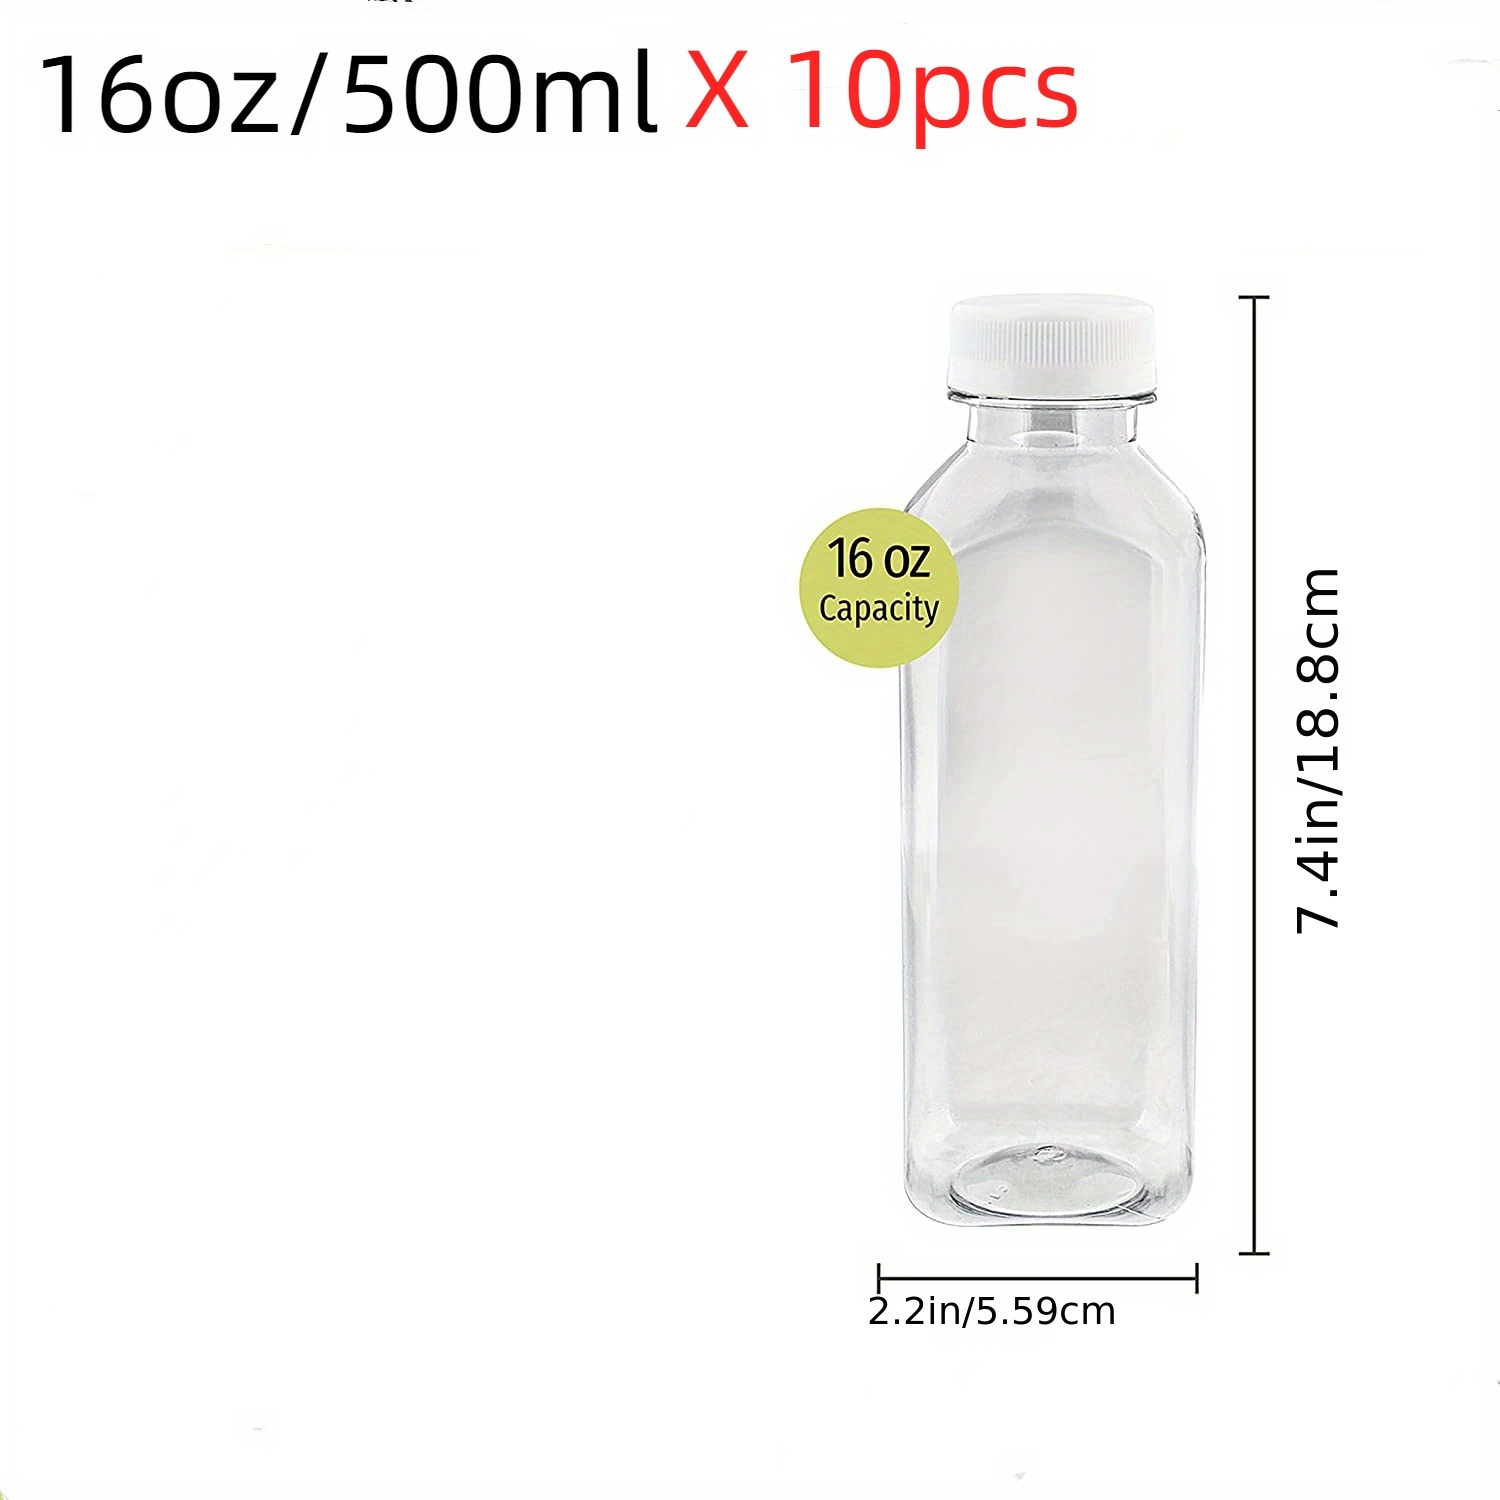 12 oz Plastic Bottles with Caps, Juice Containers with Lids for Fridge, Reusable Juicing Bottles, Smoothie Bottle, Empty Plastic Juice Bottles, Drink